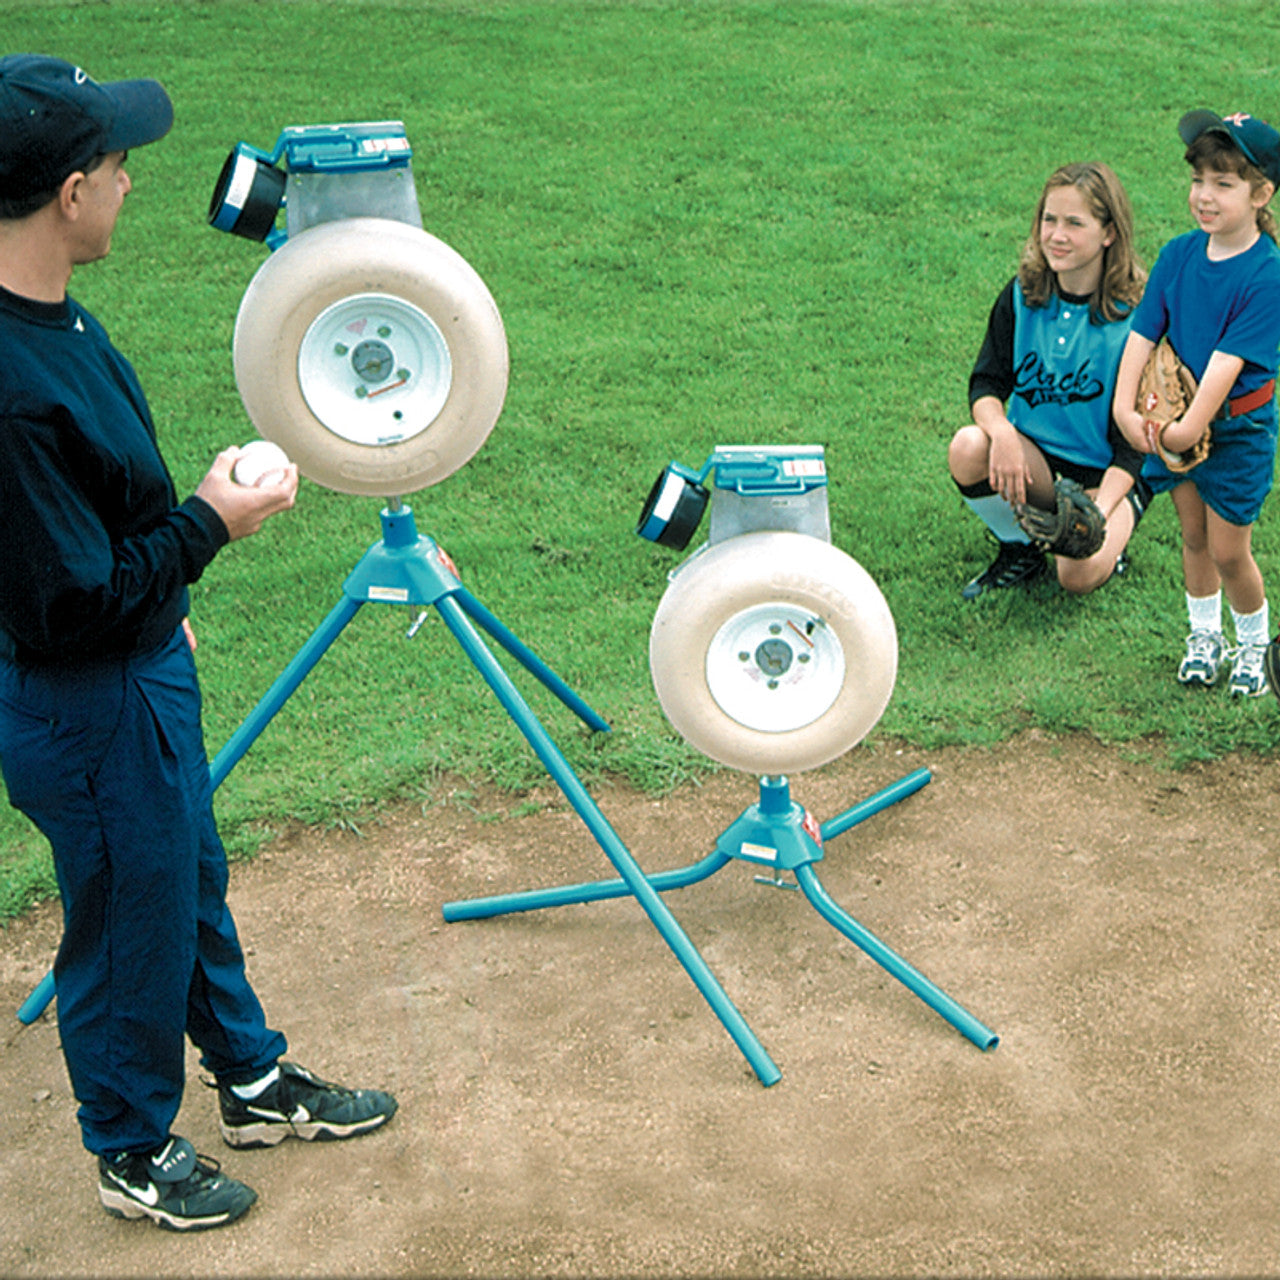 Jugs BP1 Pitching Machine for Baseball or Softball Side by Side being Demonstrated 